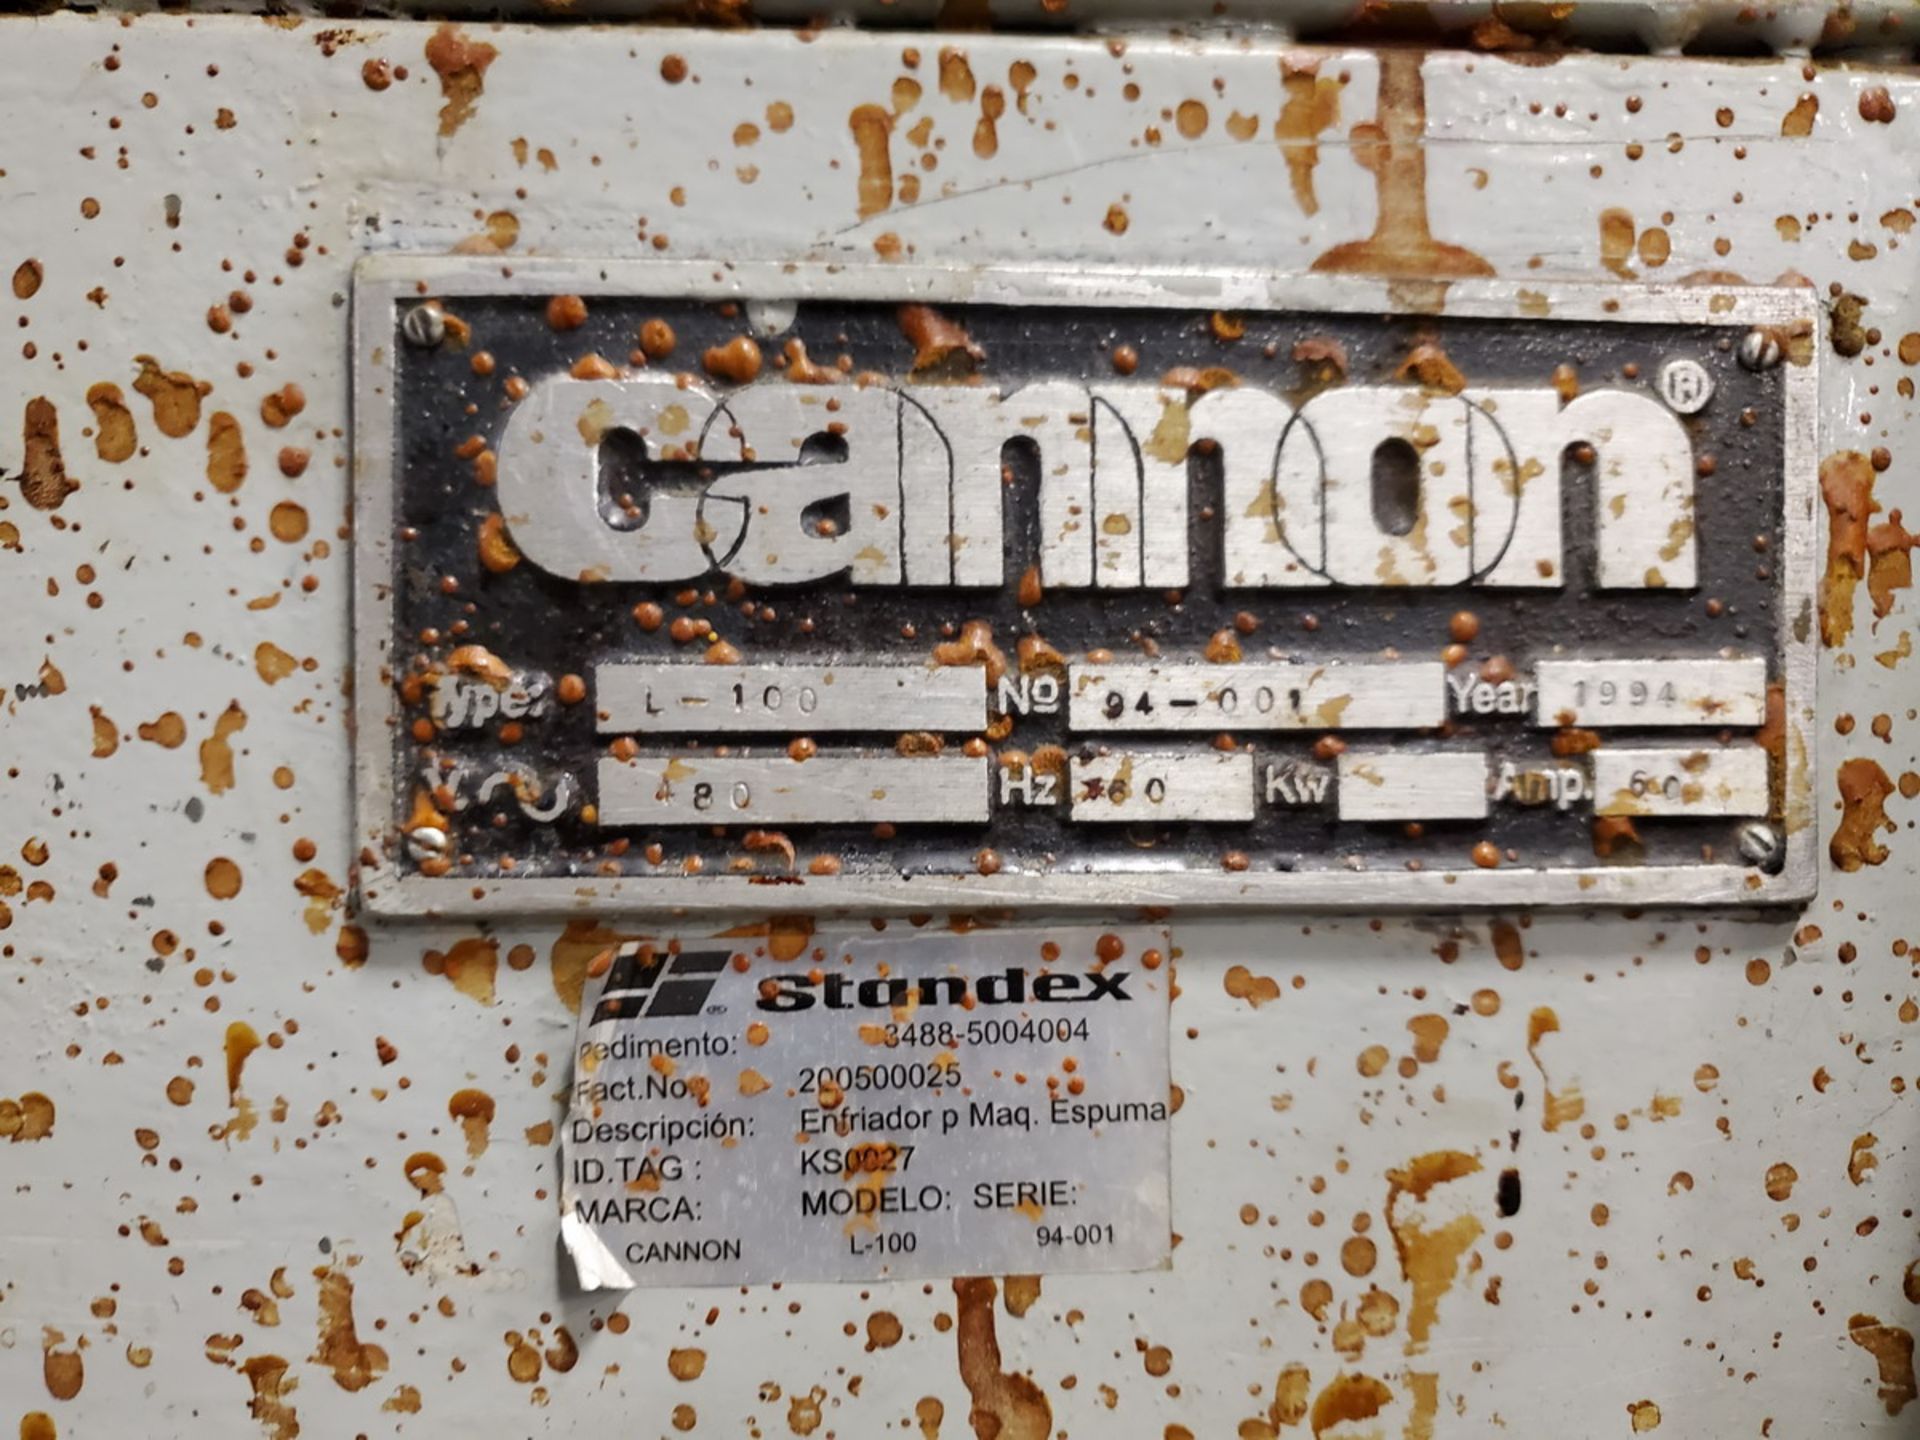 1994 Cannon L-100 HP Foaming Machine - Image 9 of 9